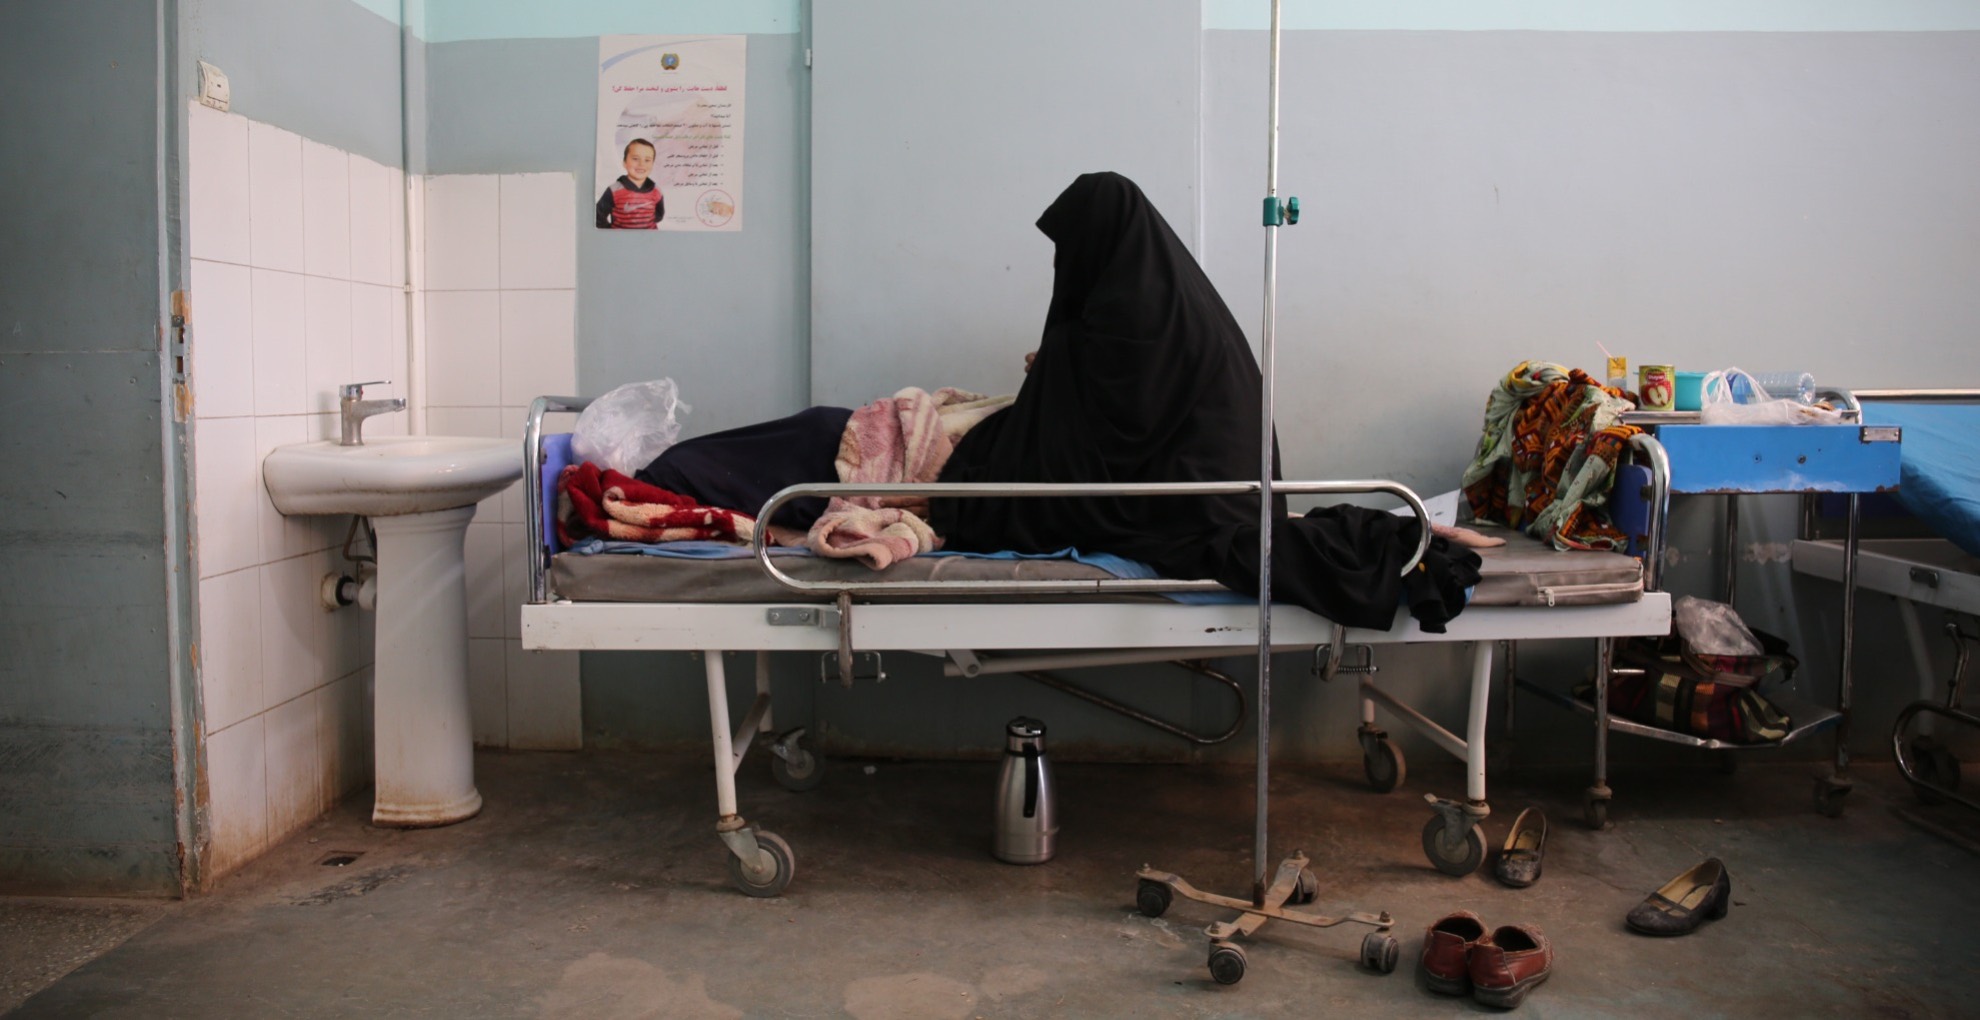 https://undark.org/wp-content/uploads/2022/07/Resized-A-female-patient-who-has-been-diagnosed-with-conversion-disorder-on-the-female-ward-at-Herat-Regional-Hospitals-Psychiatric-Department-in-Herat-Province-Afghanistan..jpg